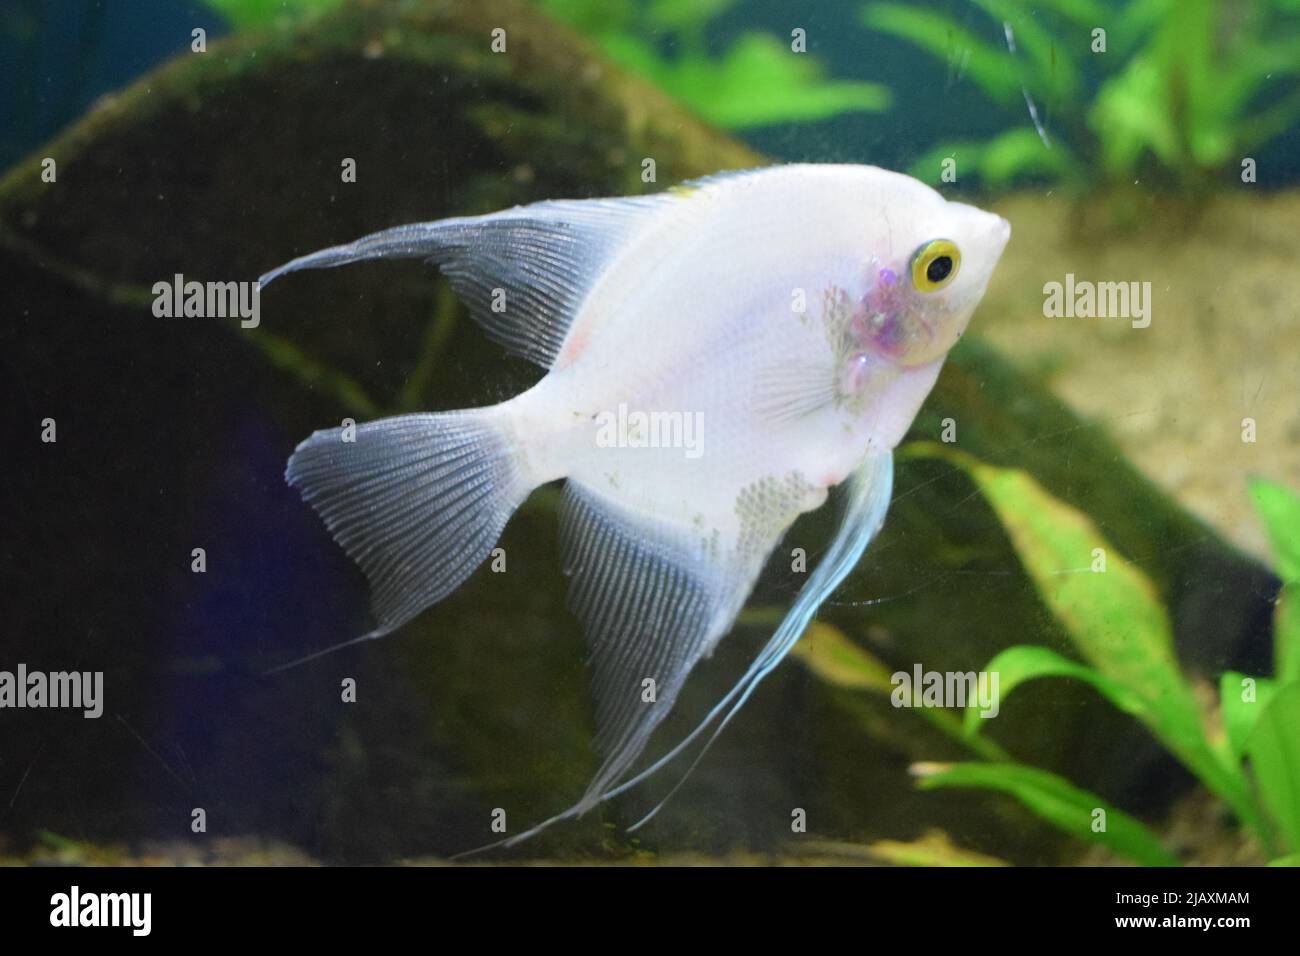 Fresh water planted aquarium with silver angelfish. Angelfish in tank fish with blurred background (Pterophyllum scalare) Stock Photo